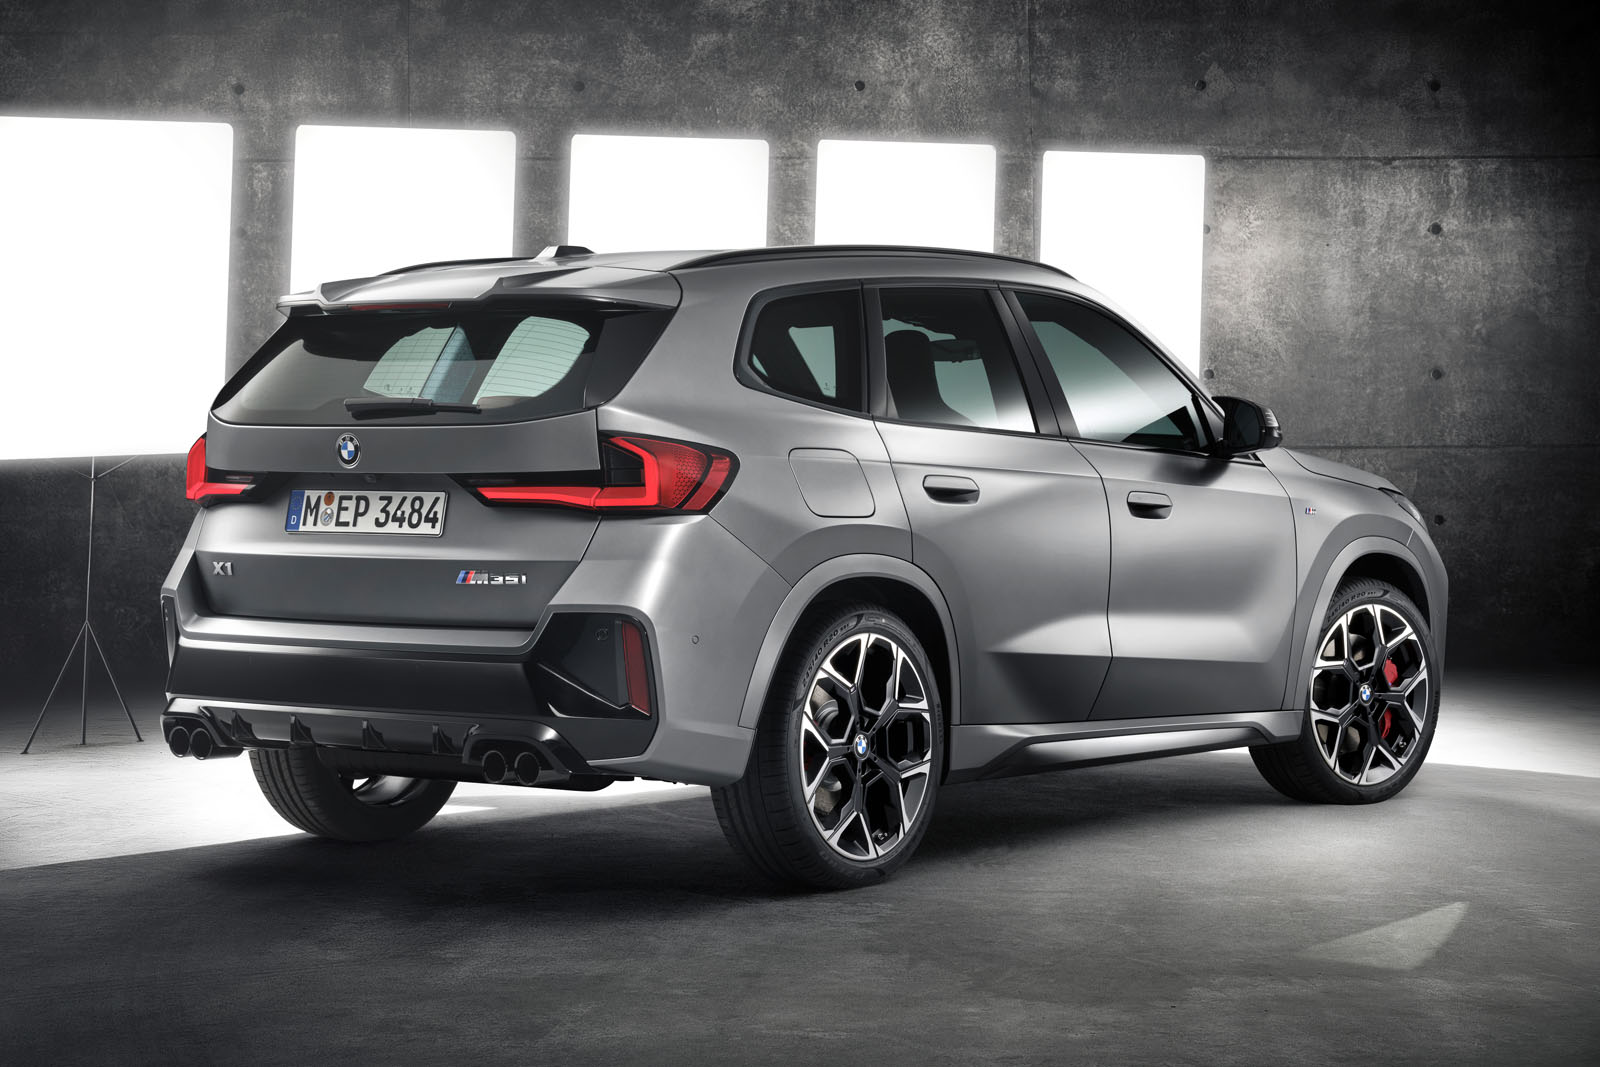 New 2023 BMW X1 M35i brings 296bhp for £45,995